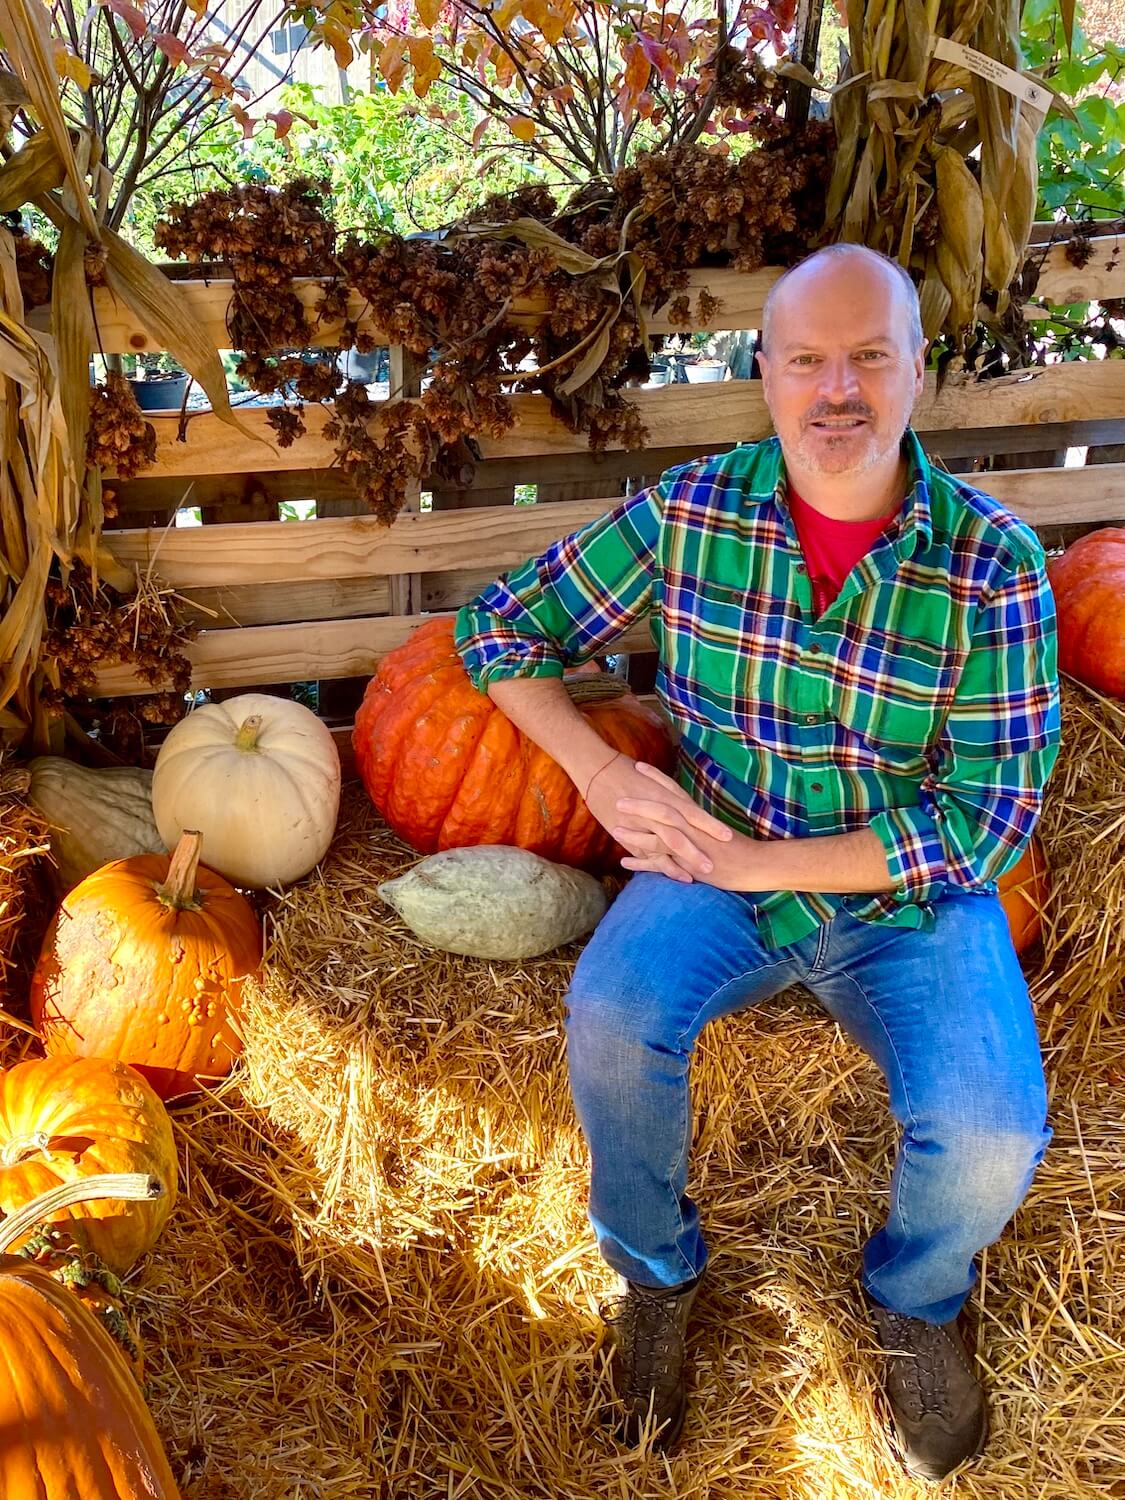 Matthew Kessi sits on a bale of straw for this photo of a fall harvest scene, complete with pumpkins and gourds and corn stalks tied to a wooden fence.